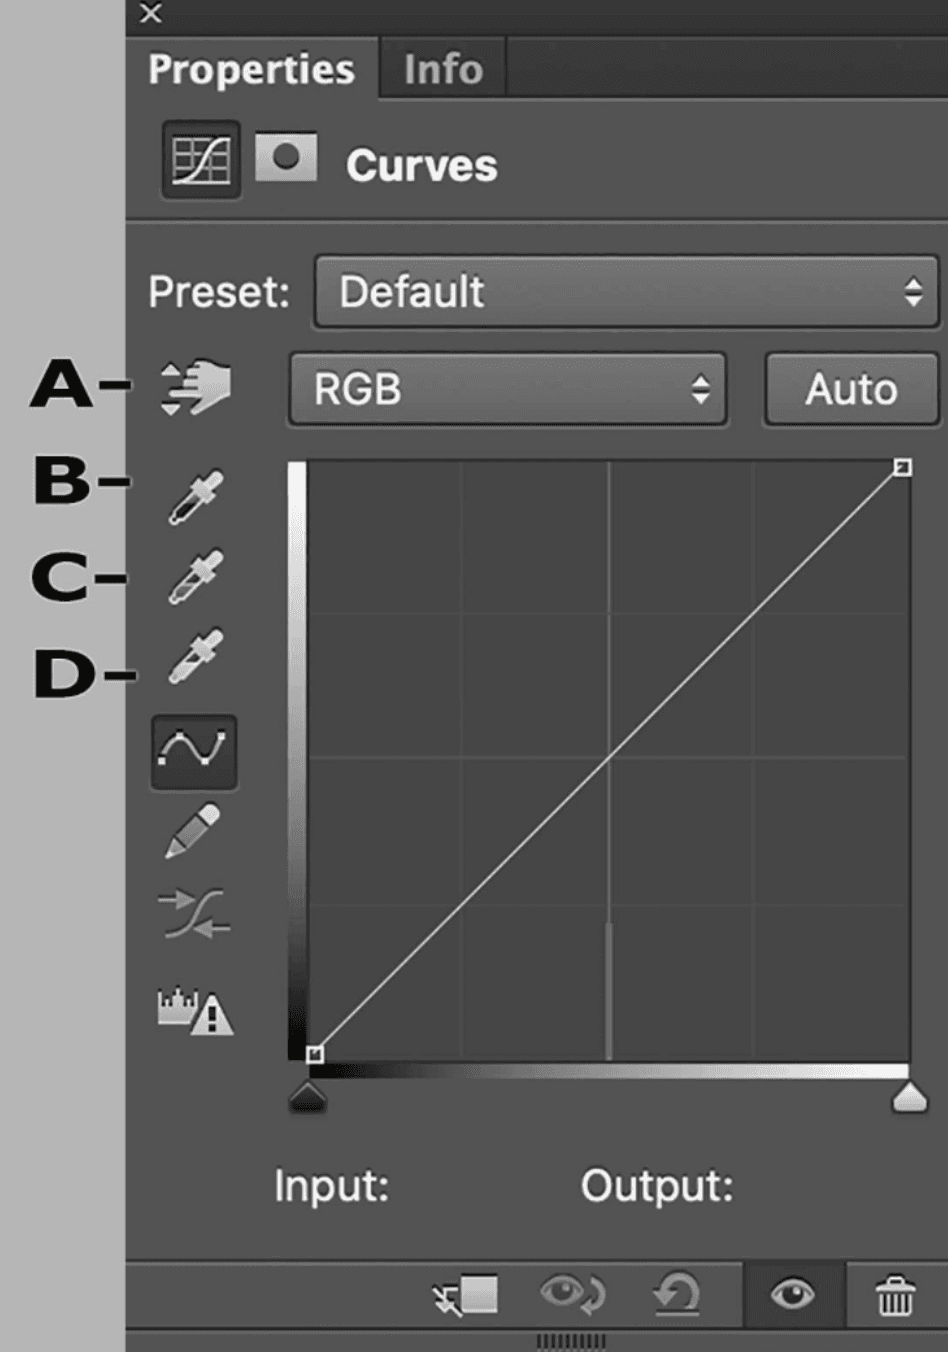 Which RGB control do you click to add a single control point to the Curves adjustment?